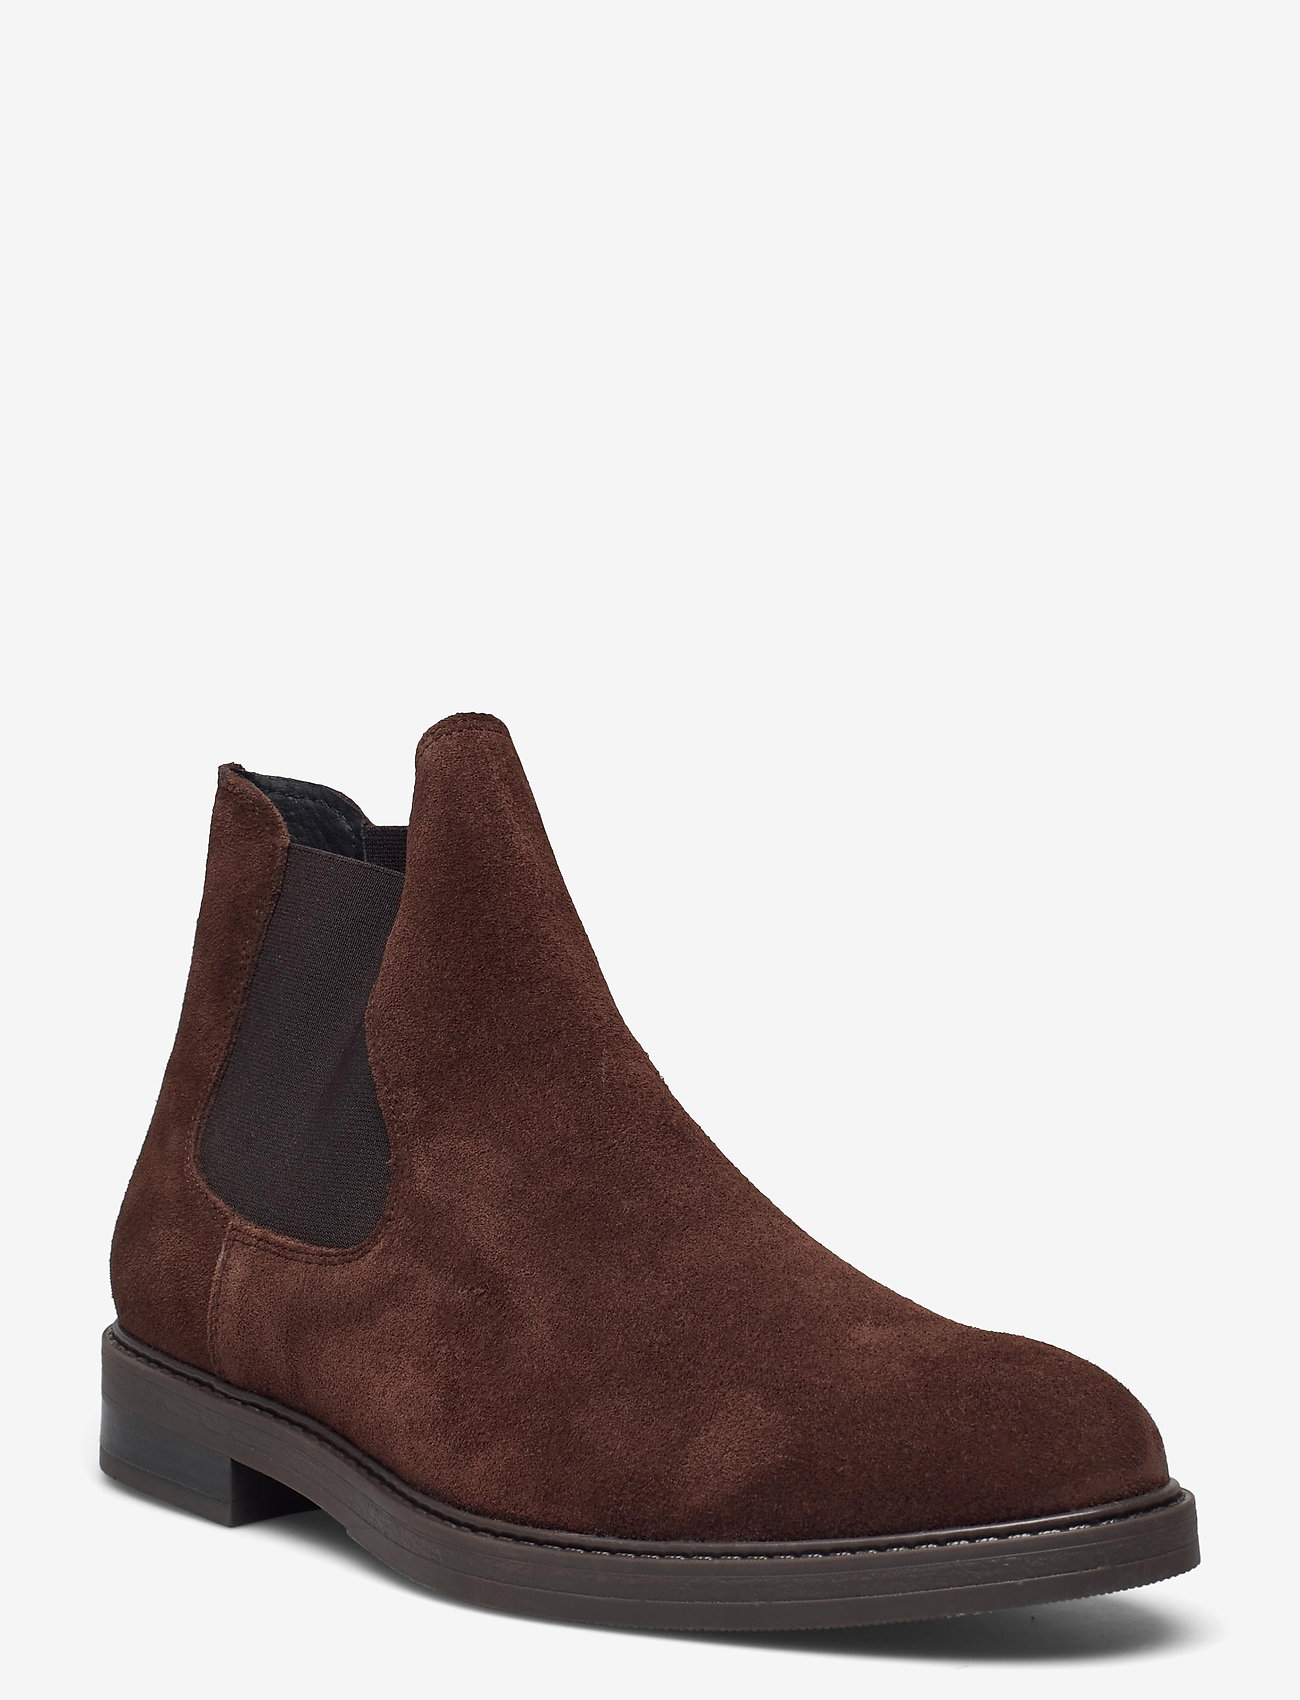 Selected Homme - SLHBLAKE SUEDE CHELSEA BOOT NOOS - birthday gifts - chocolate brown - 0